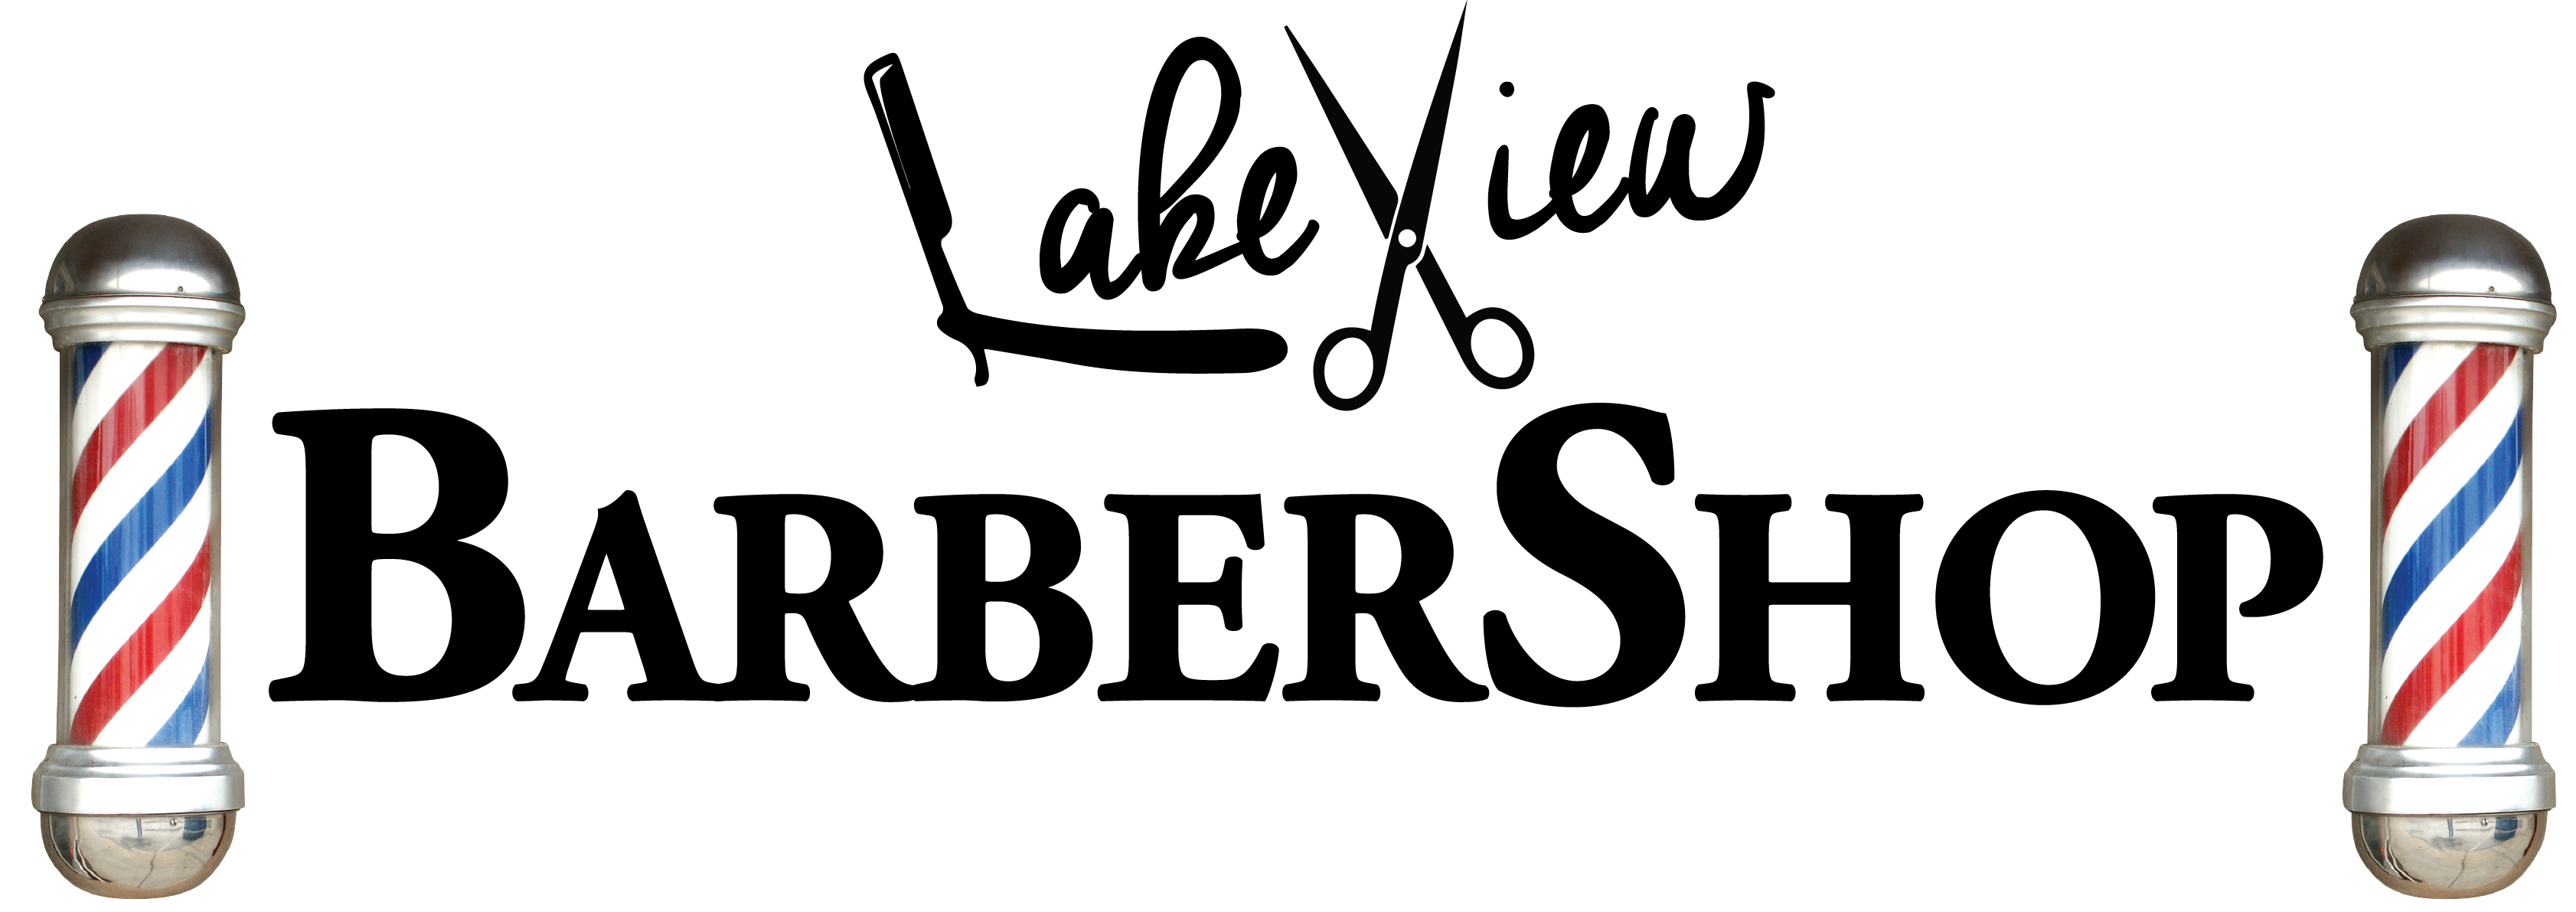 A pair of scissors are shown in the dark.